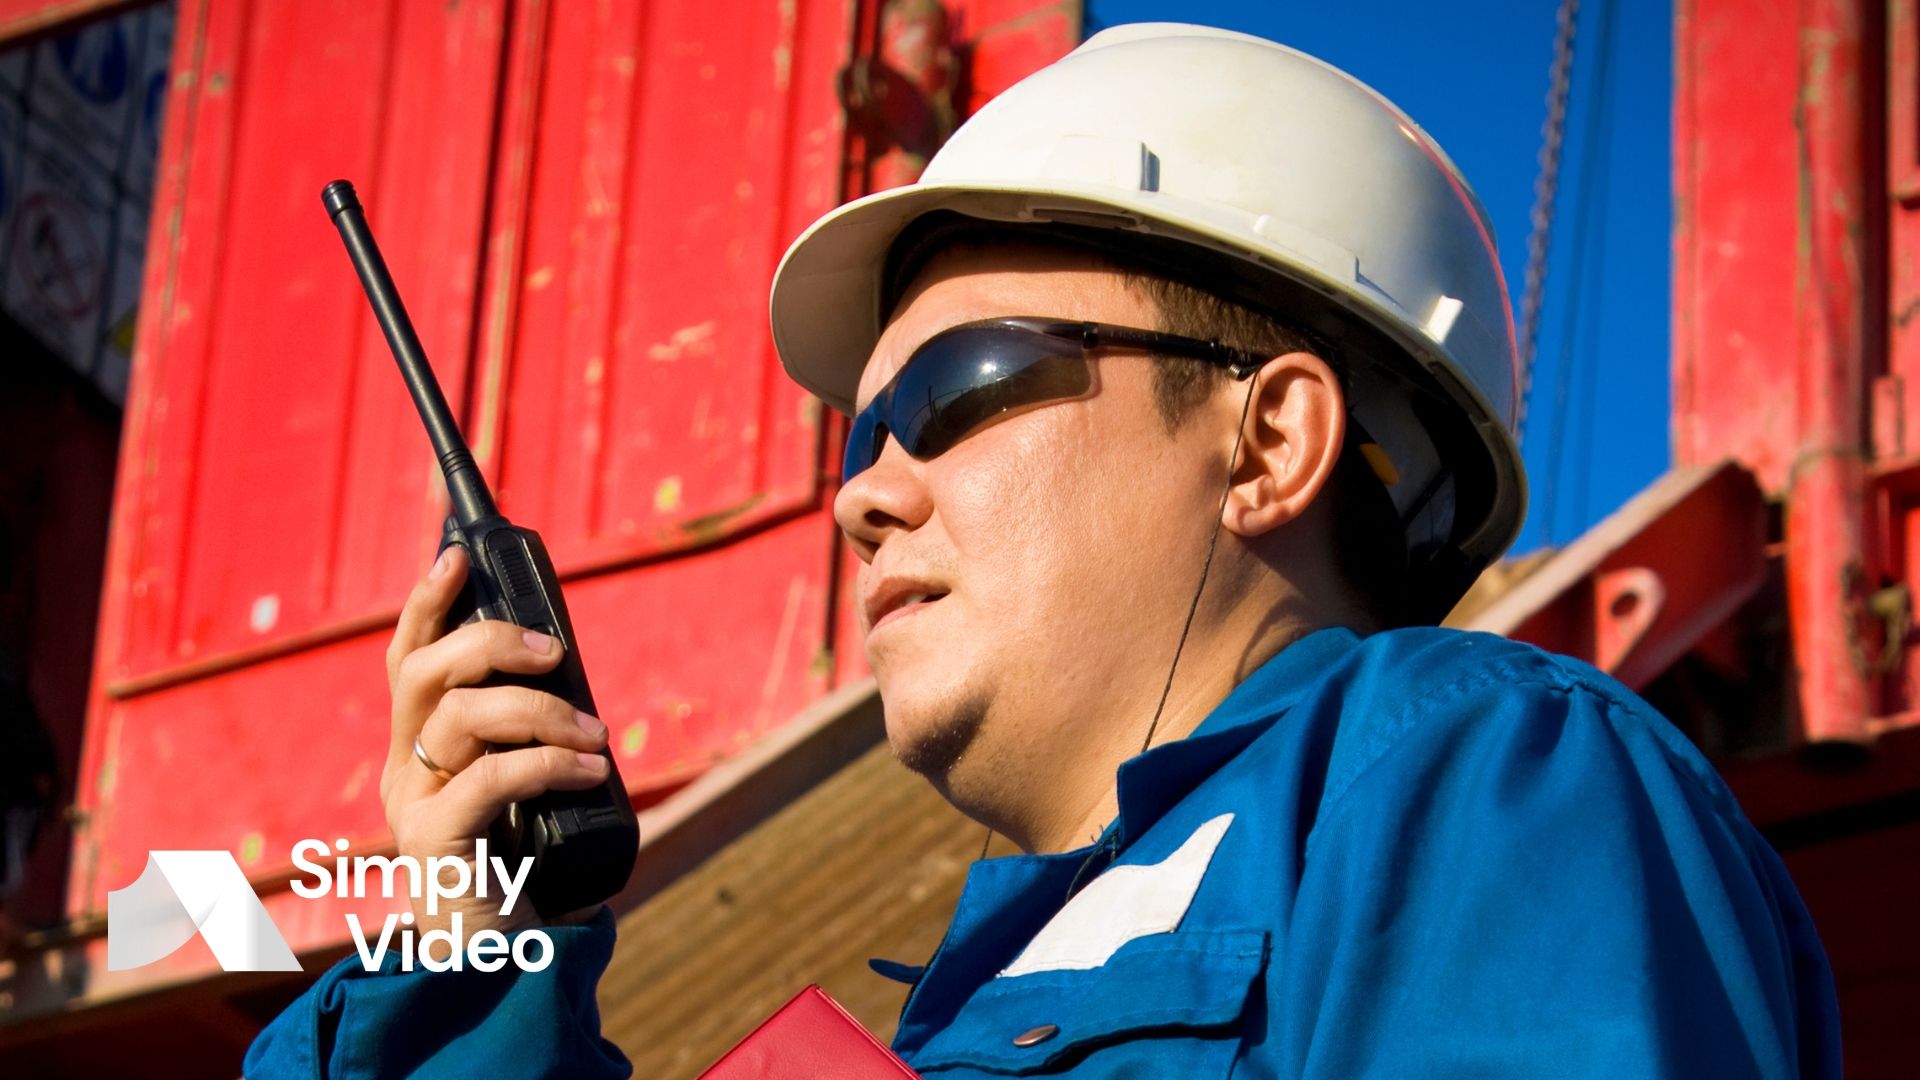 Field service management is hard. But with extended reality (XR) technology and some clever video software, you can make it easier. Learn how inside.